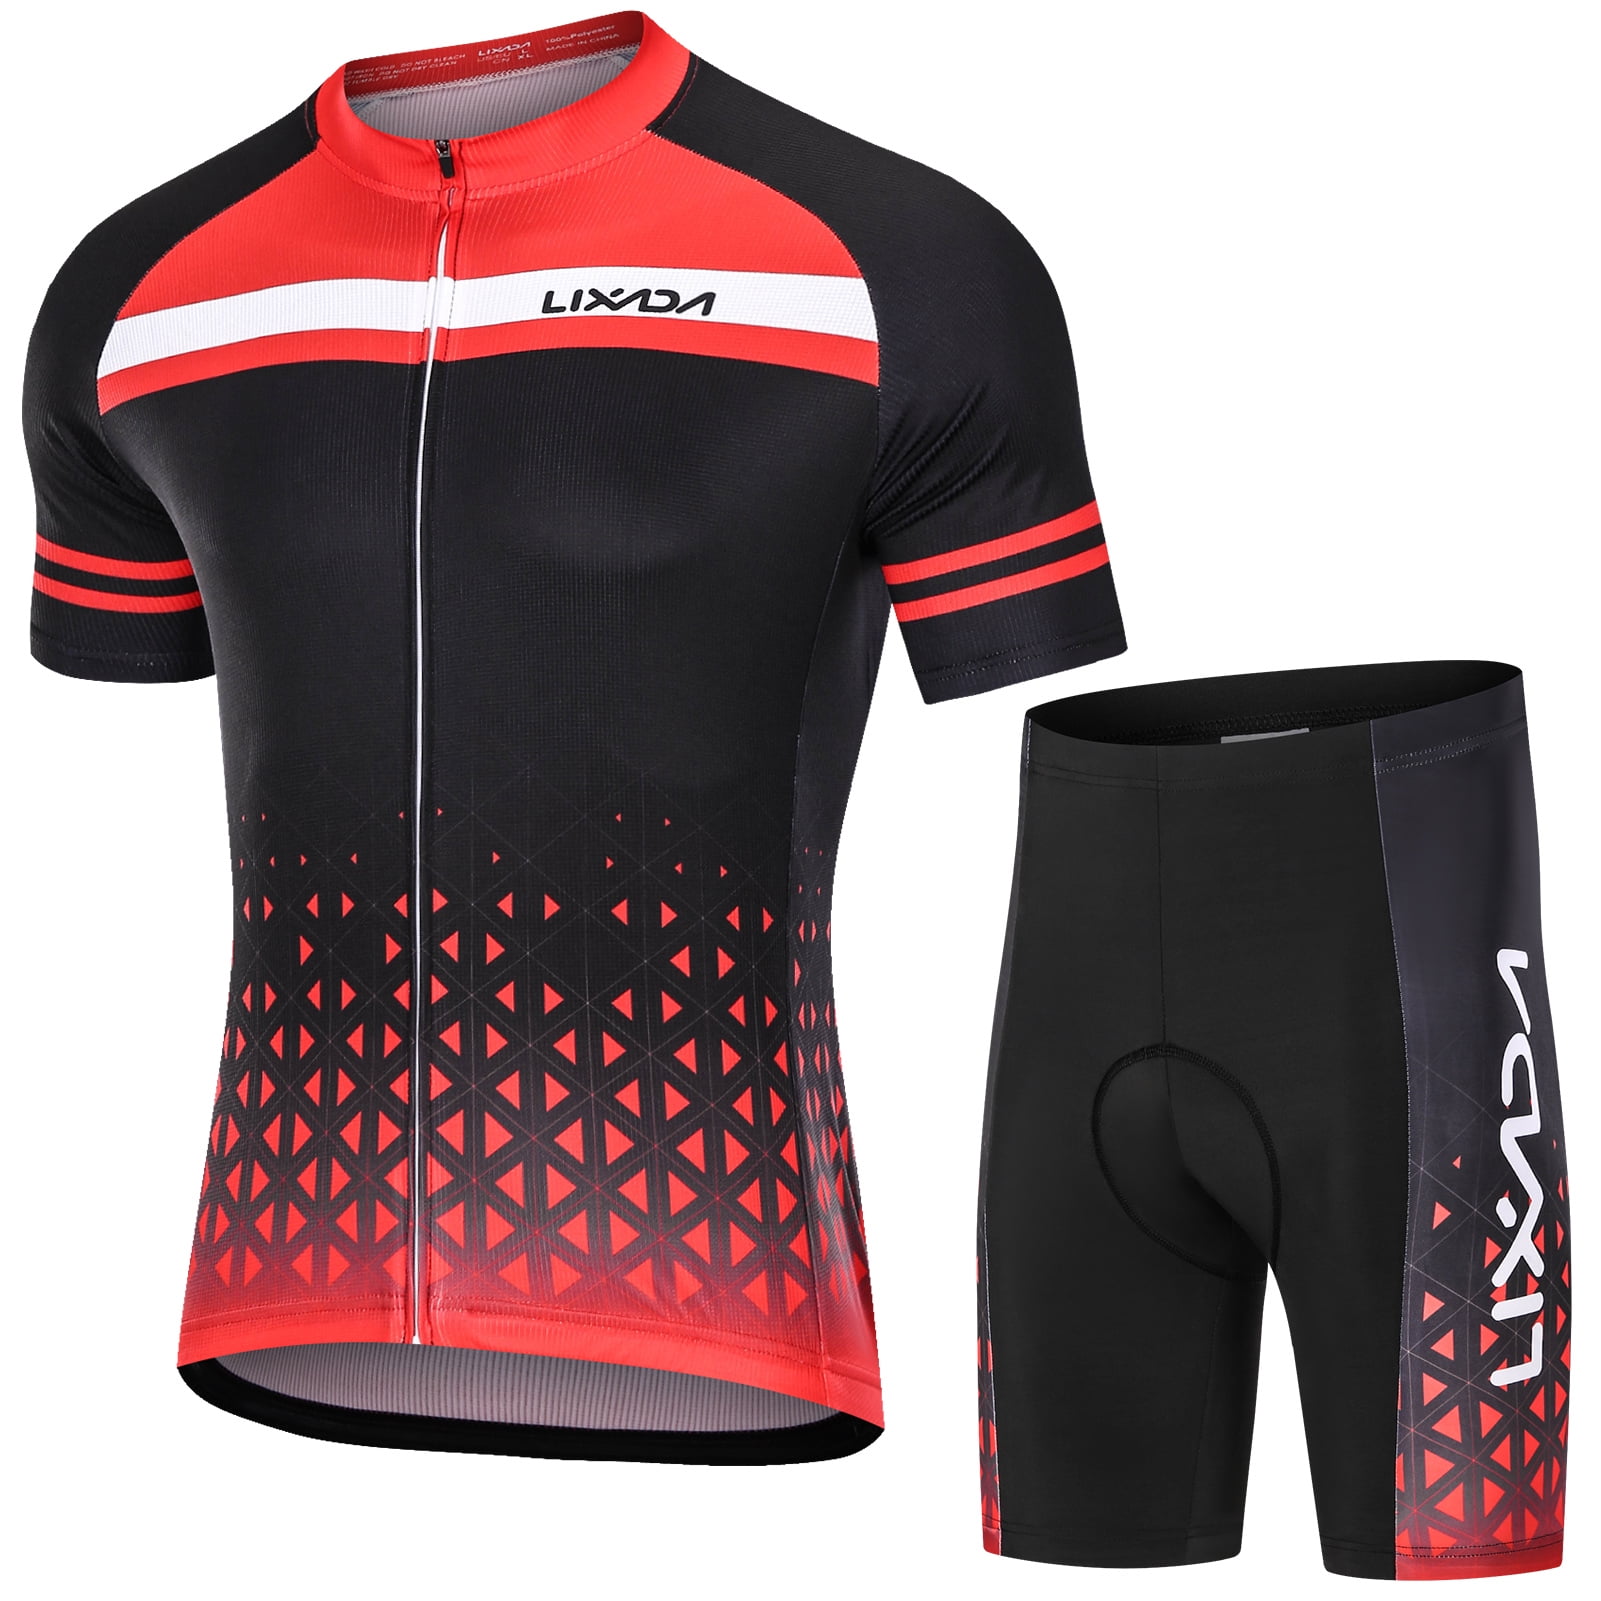 Details about   Mens Cycling Jersey Set Road Racing Short Sleeve Bike Outfits Bicycle Uniform 